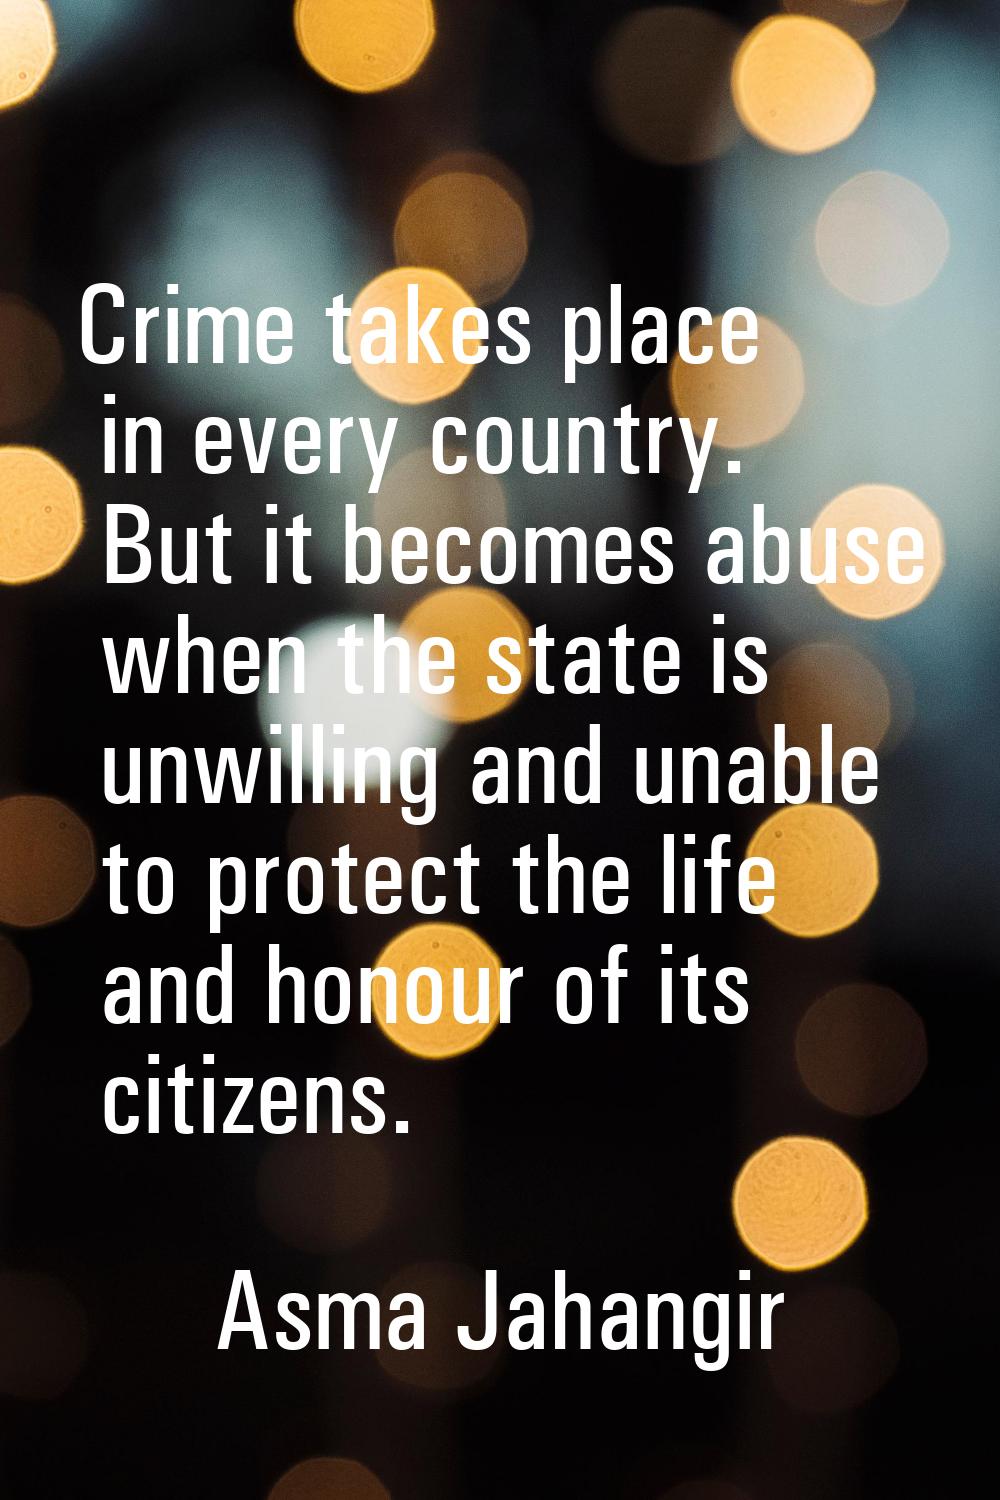 Crime takes place in every country. But it becomes abuse when the state is unwilling and unable to 